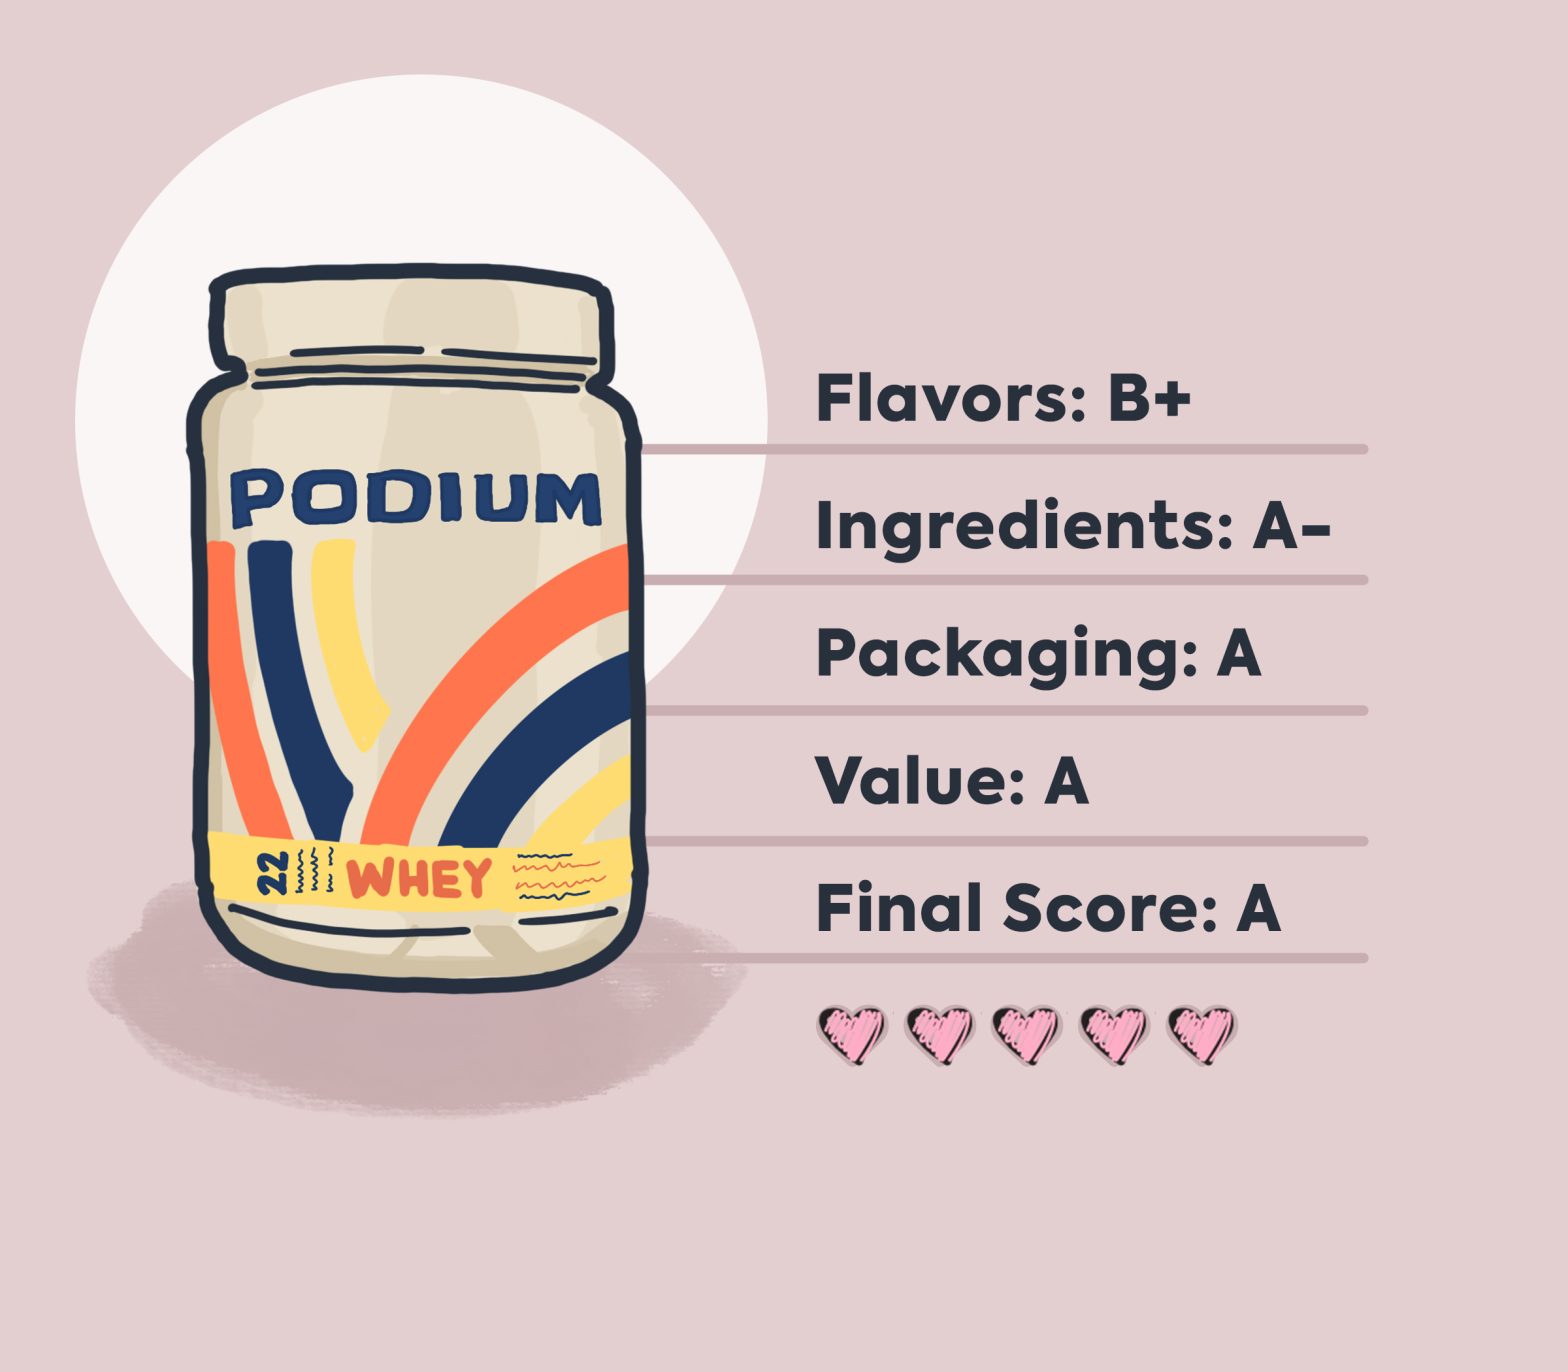 podium protein powder hand-drawn packaging with review information with dusty pink background